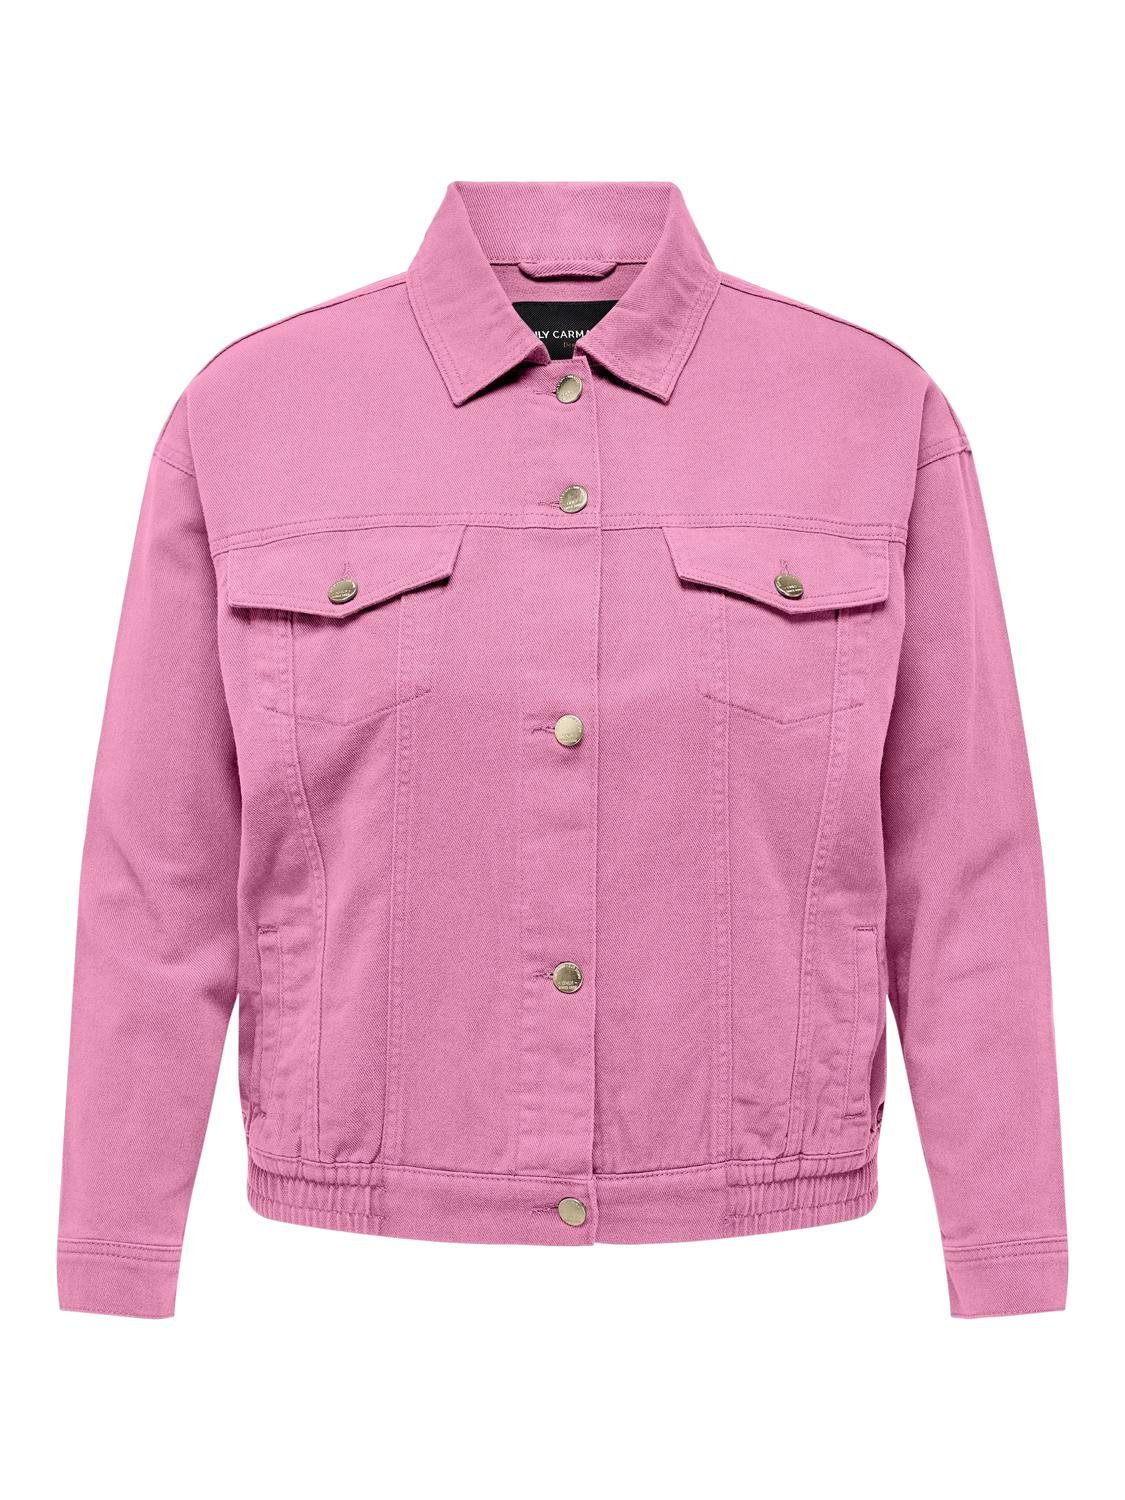 Only Carmakoma Denim Jacket in Pink